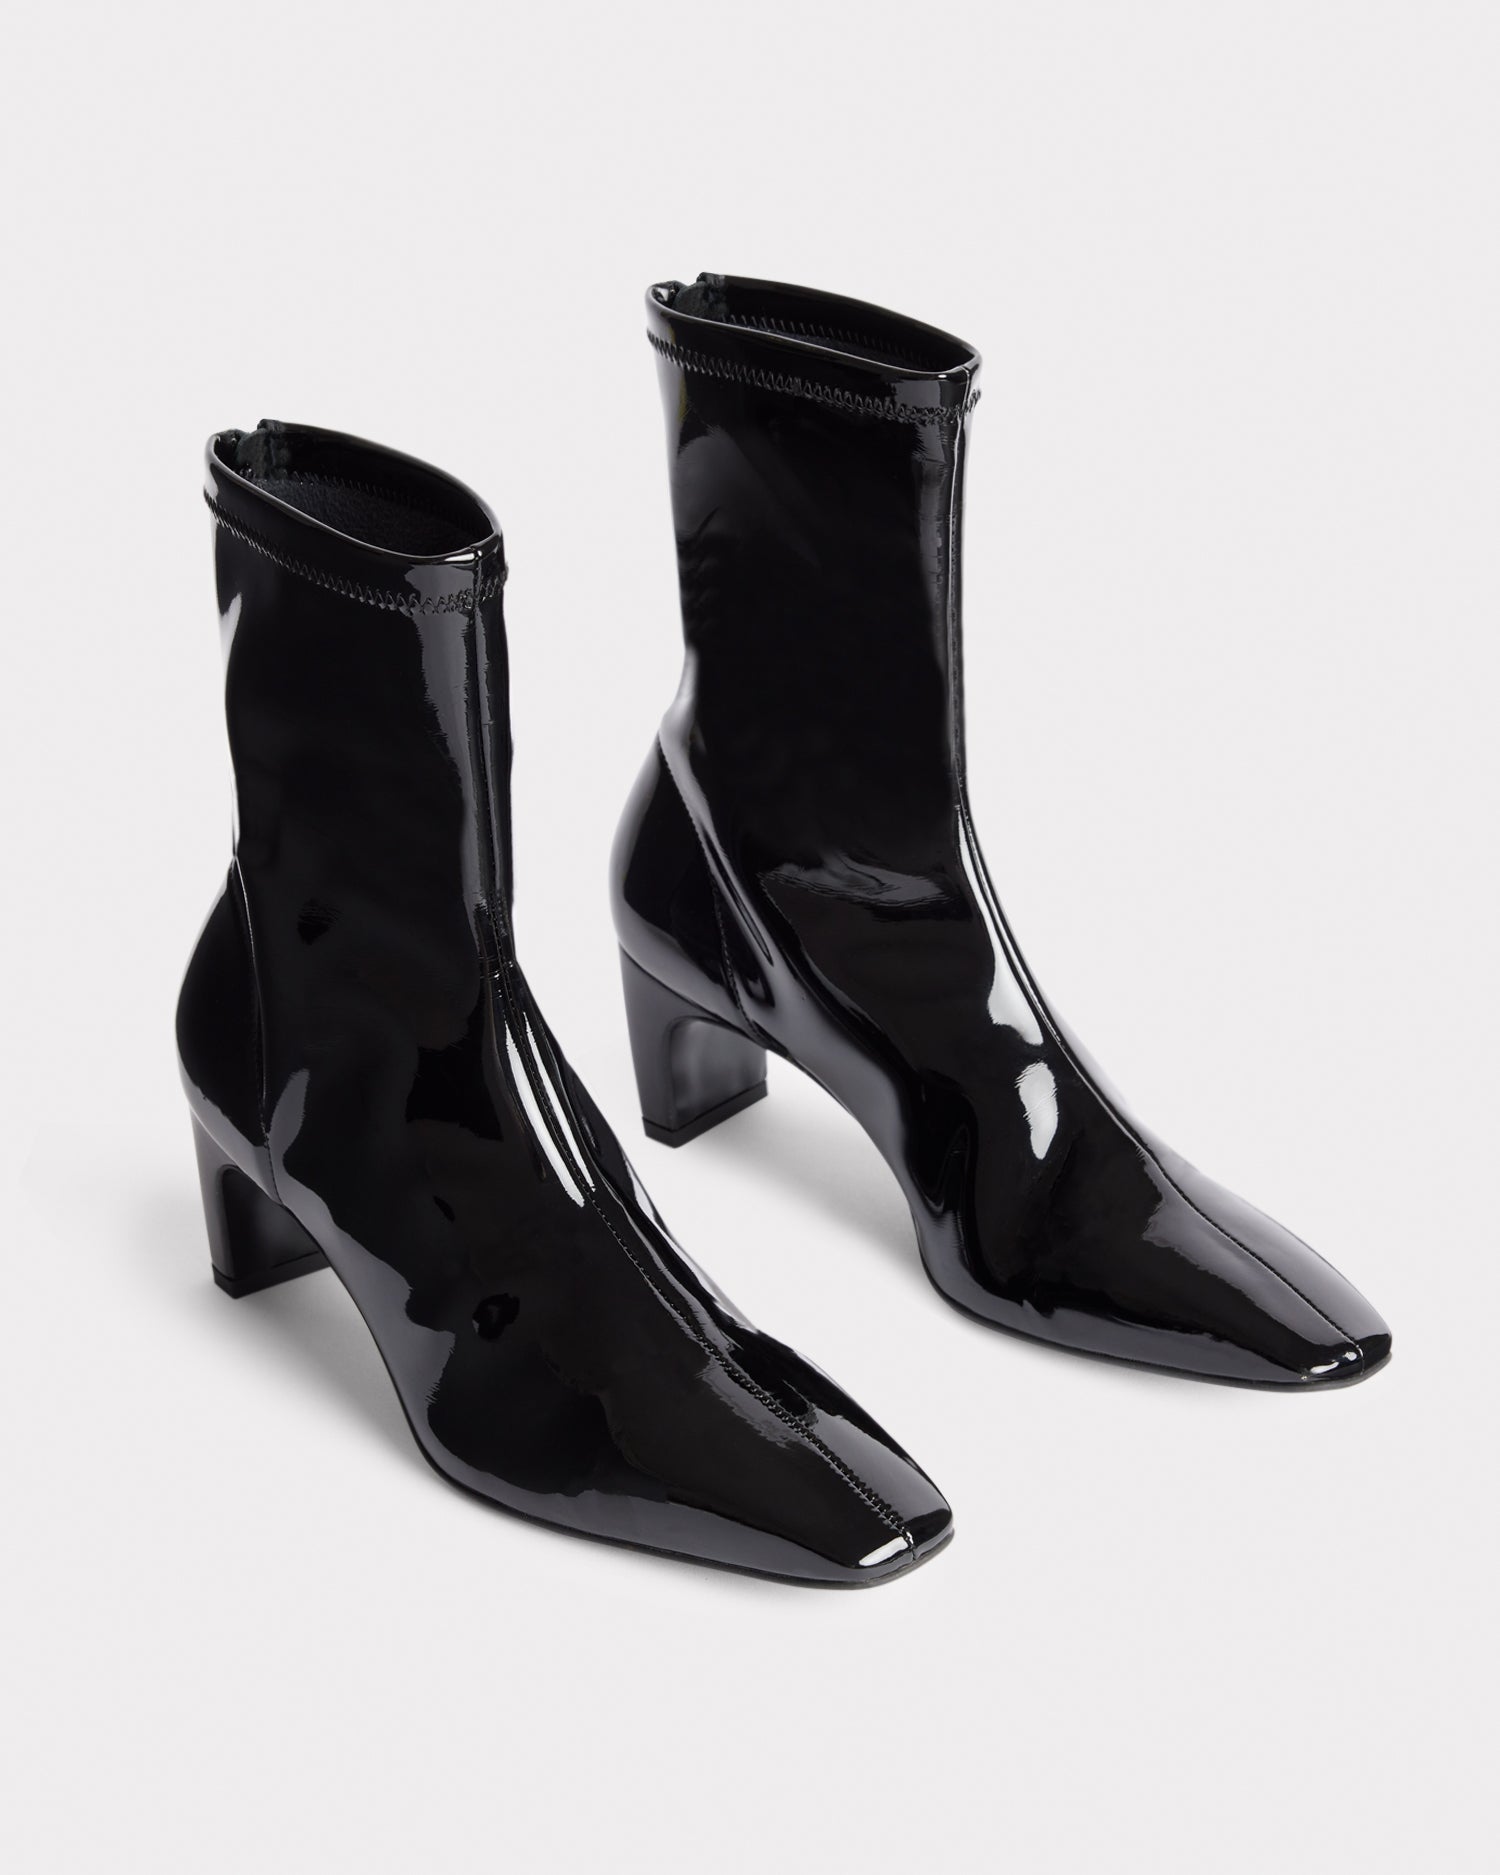 eco chic black patent leather glove boots